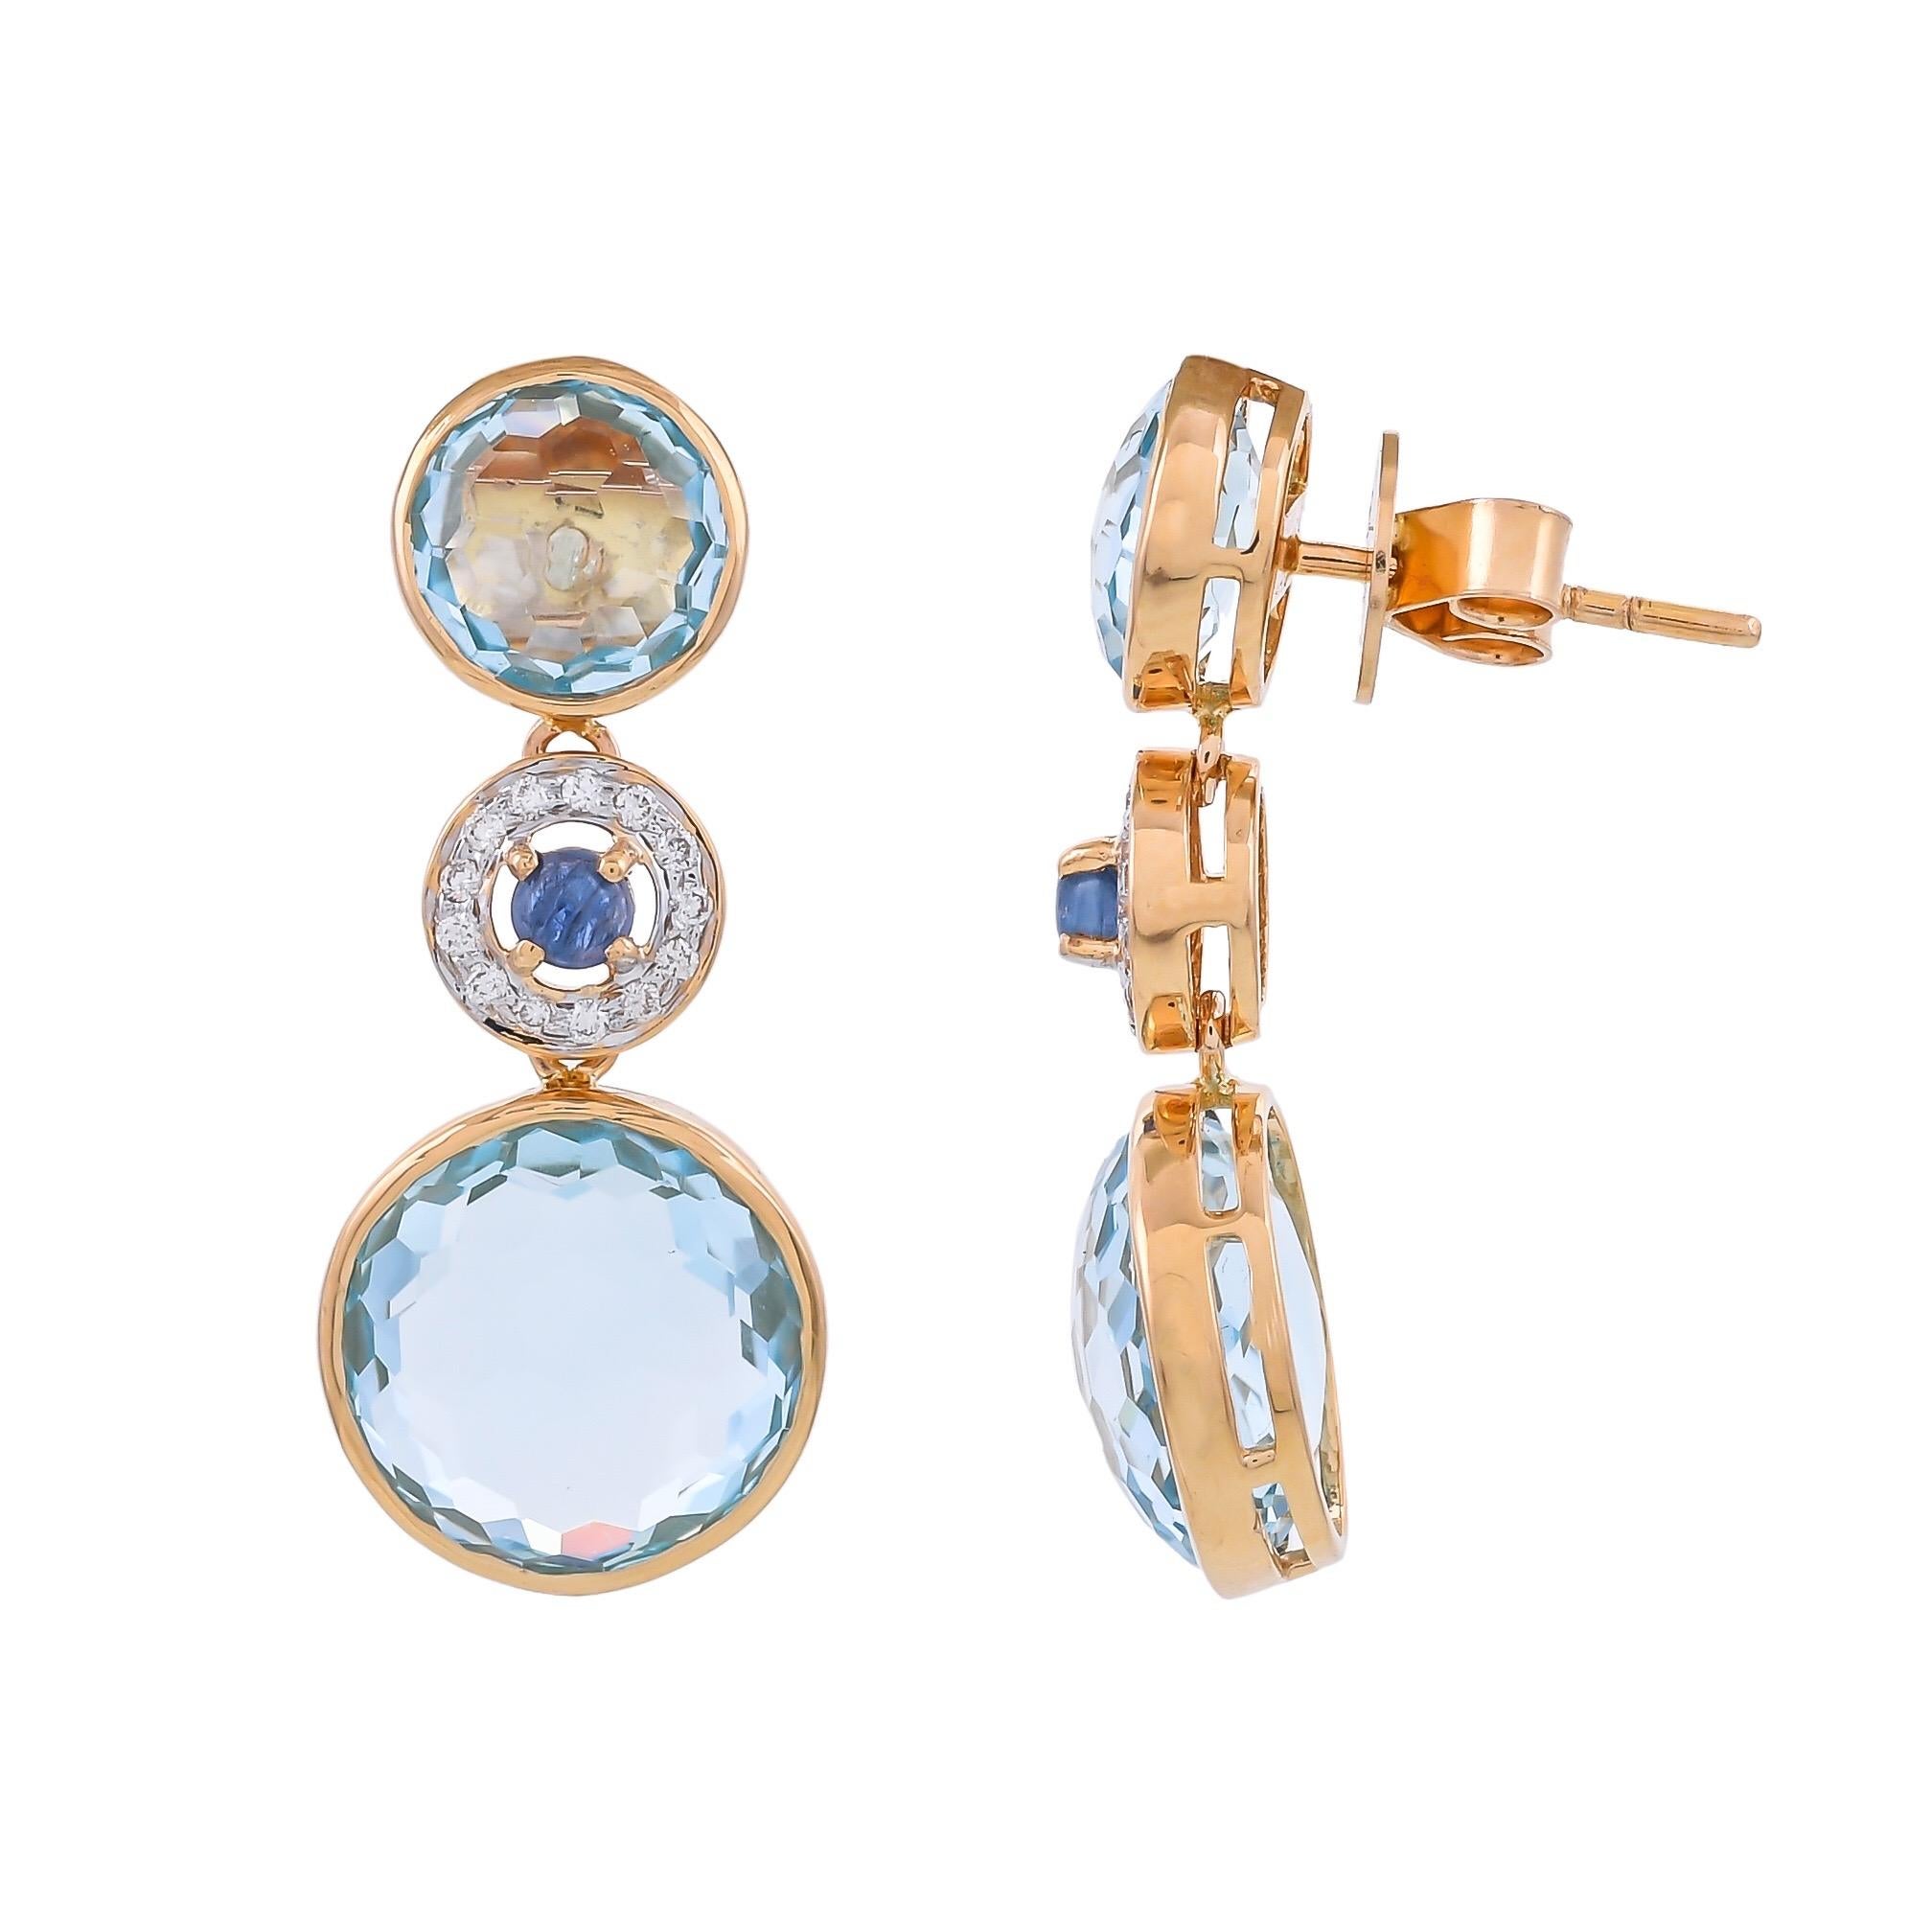 Mounted in 18 karats yellow gold, this simple and elegant earring is from the collection 'Bonbon'. This earring revolves around simplistic designs concept with just accents of 0.16 carats diamonds, 0.37 carats blue sapphire and 19.84 carats blue